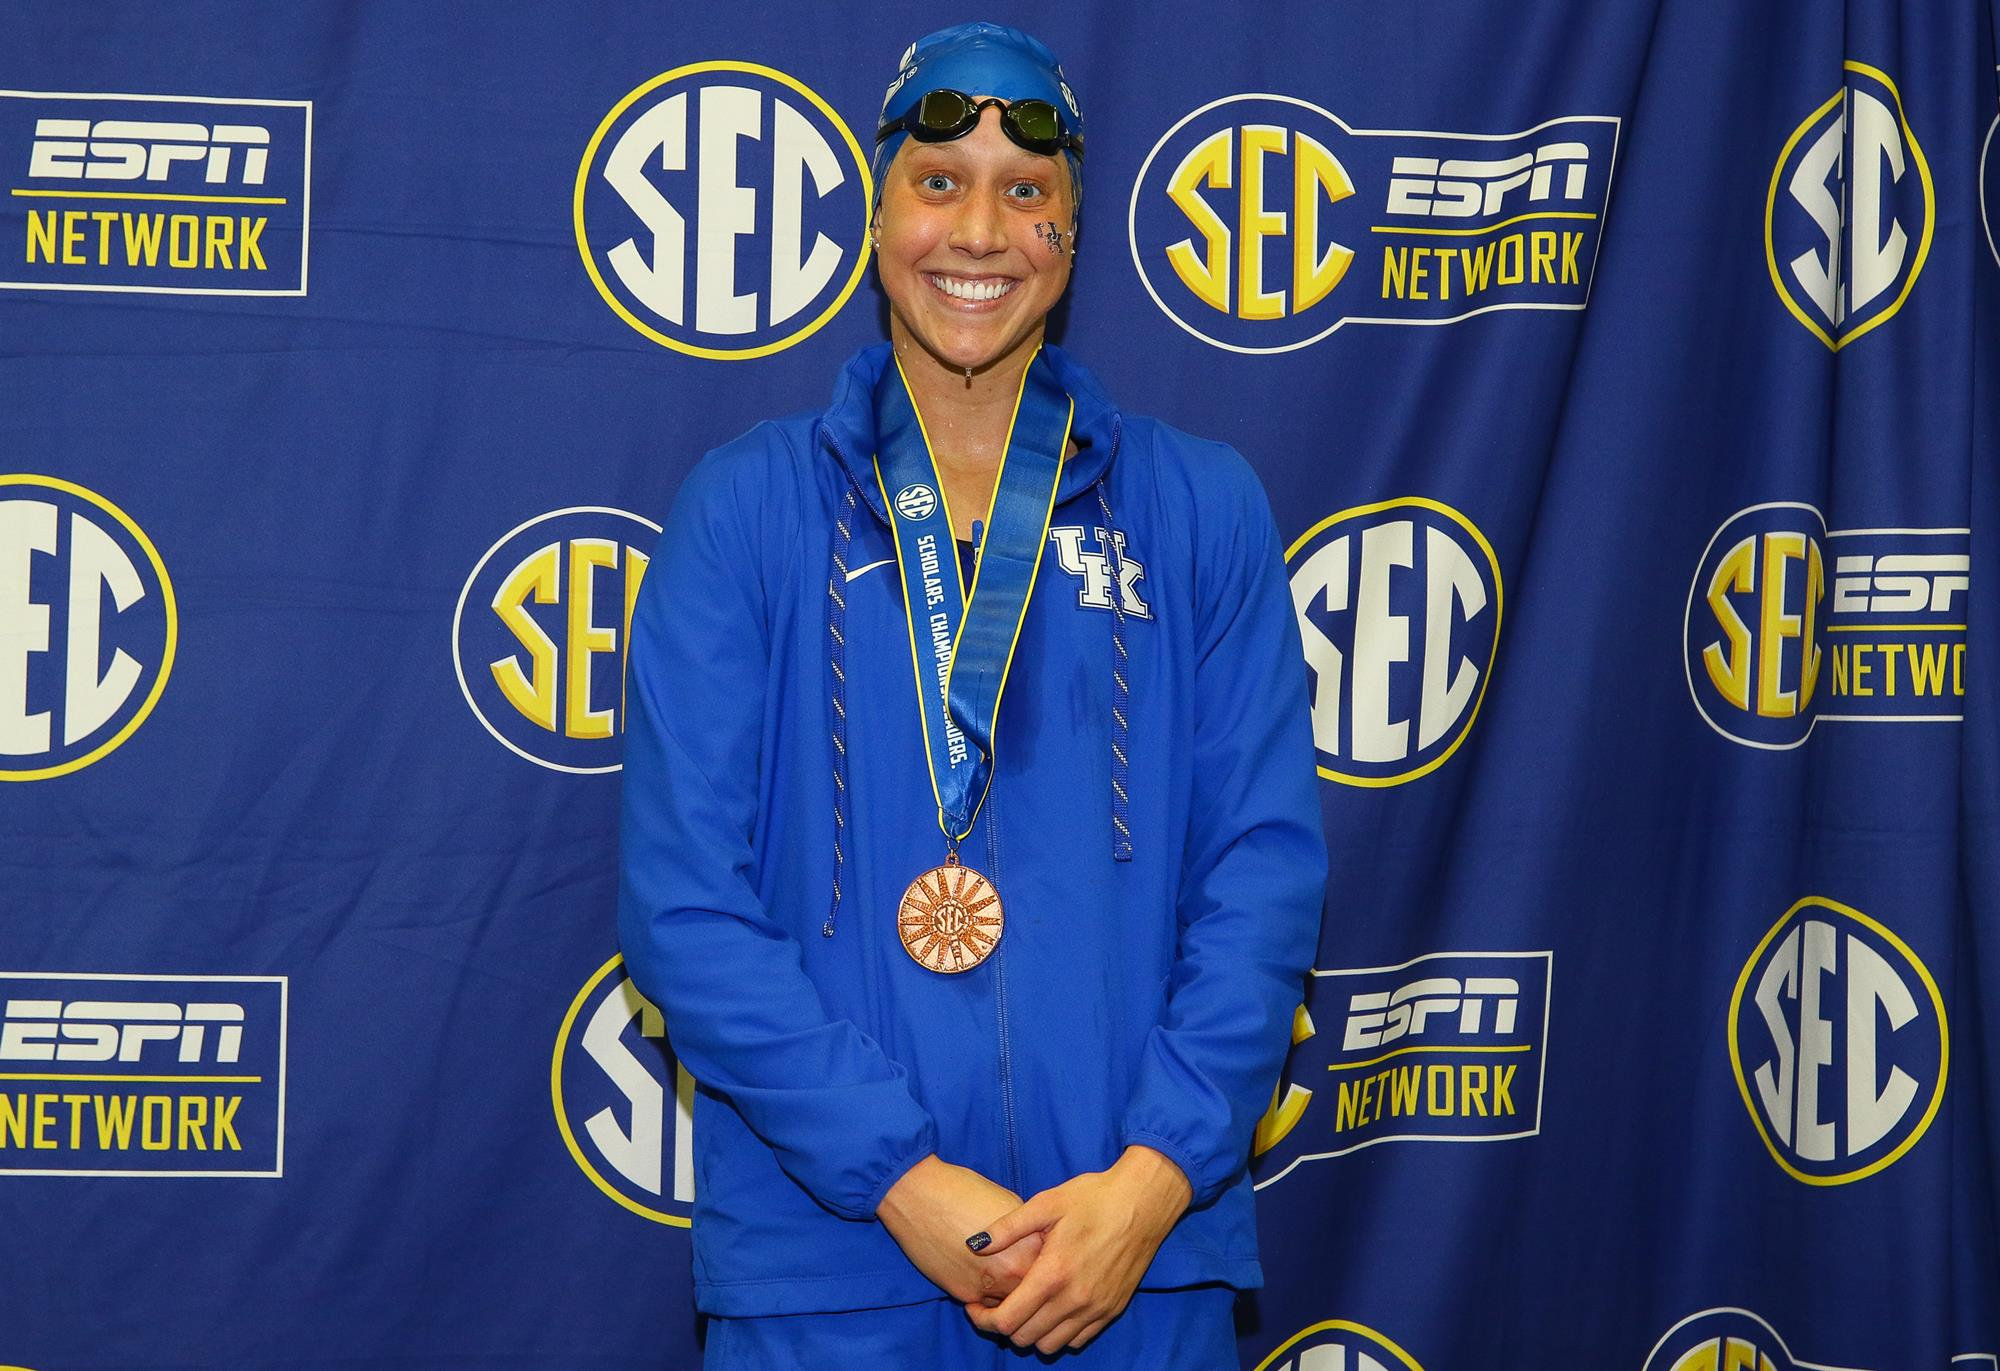 Freriks Collected Bronze and Reset Her Own School Record